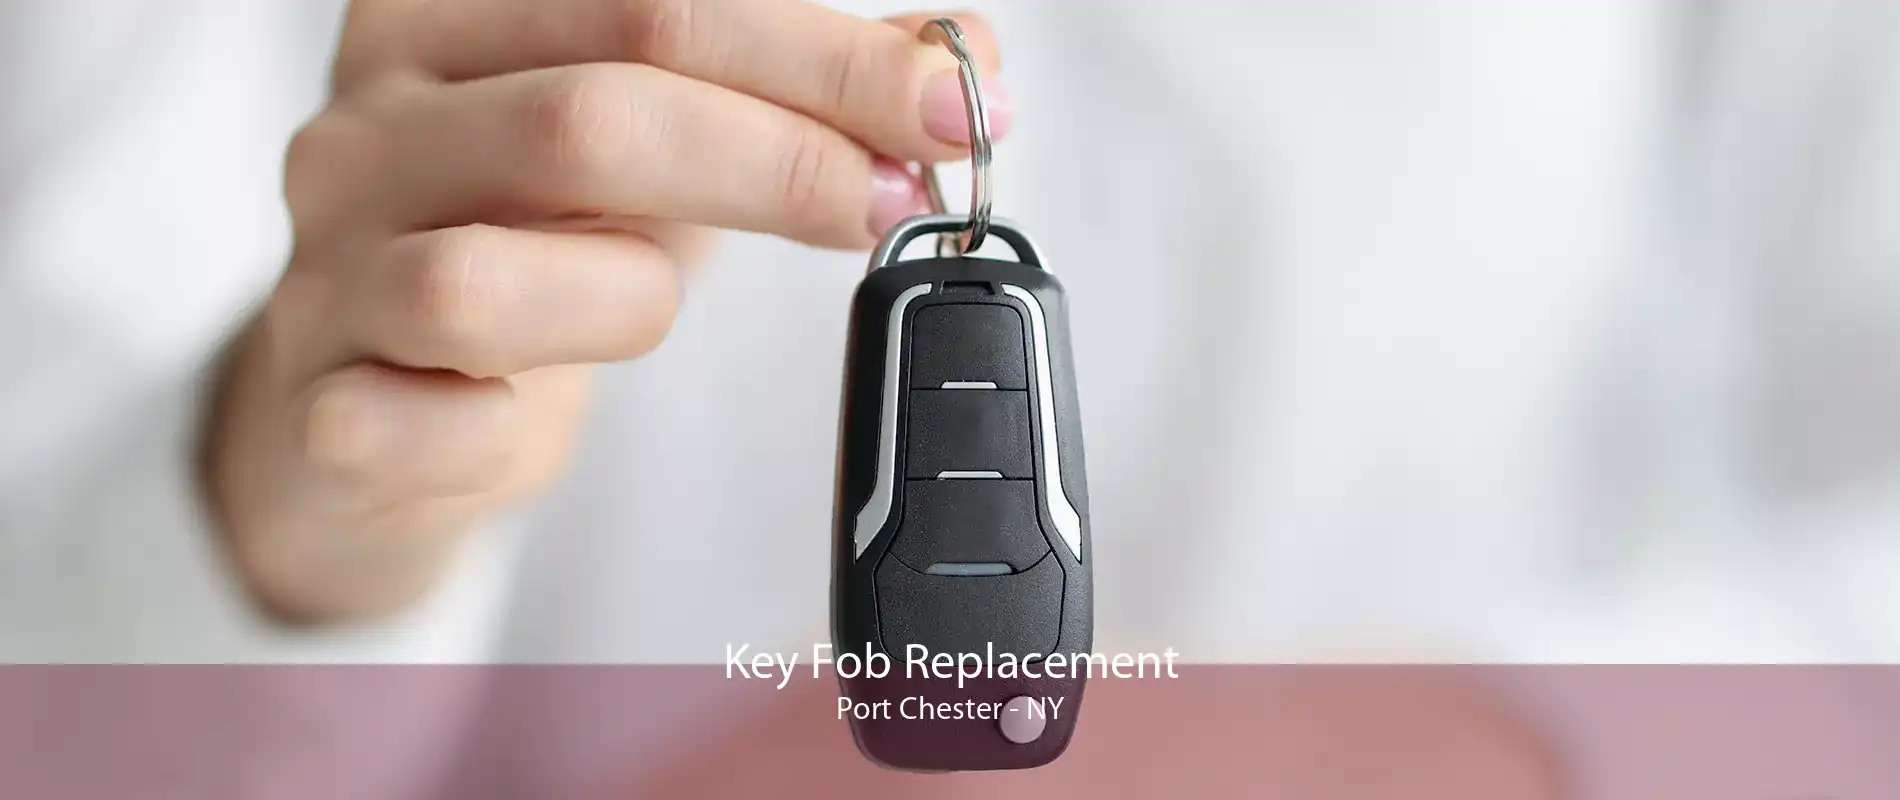 Key Fob Replacement Port Chester - NY